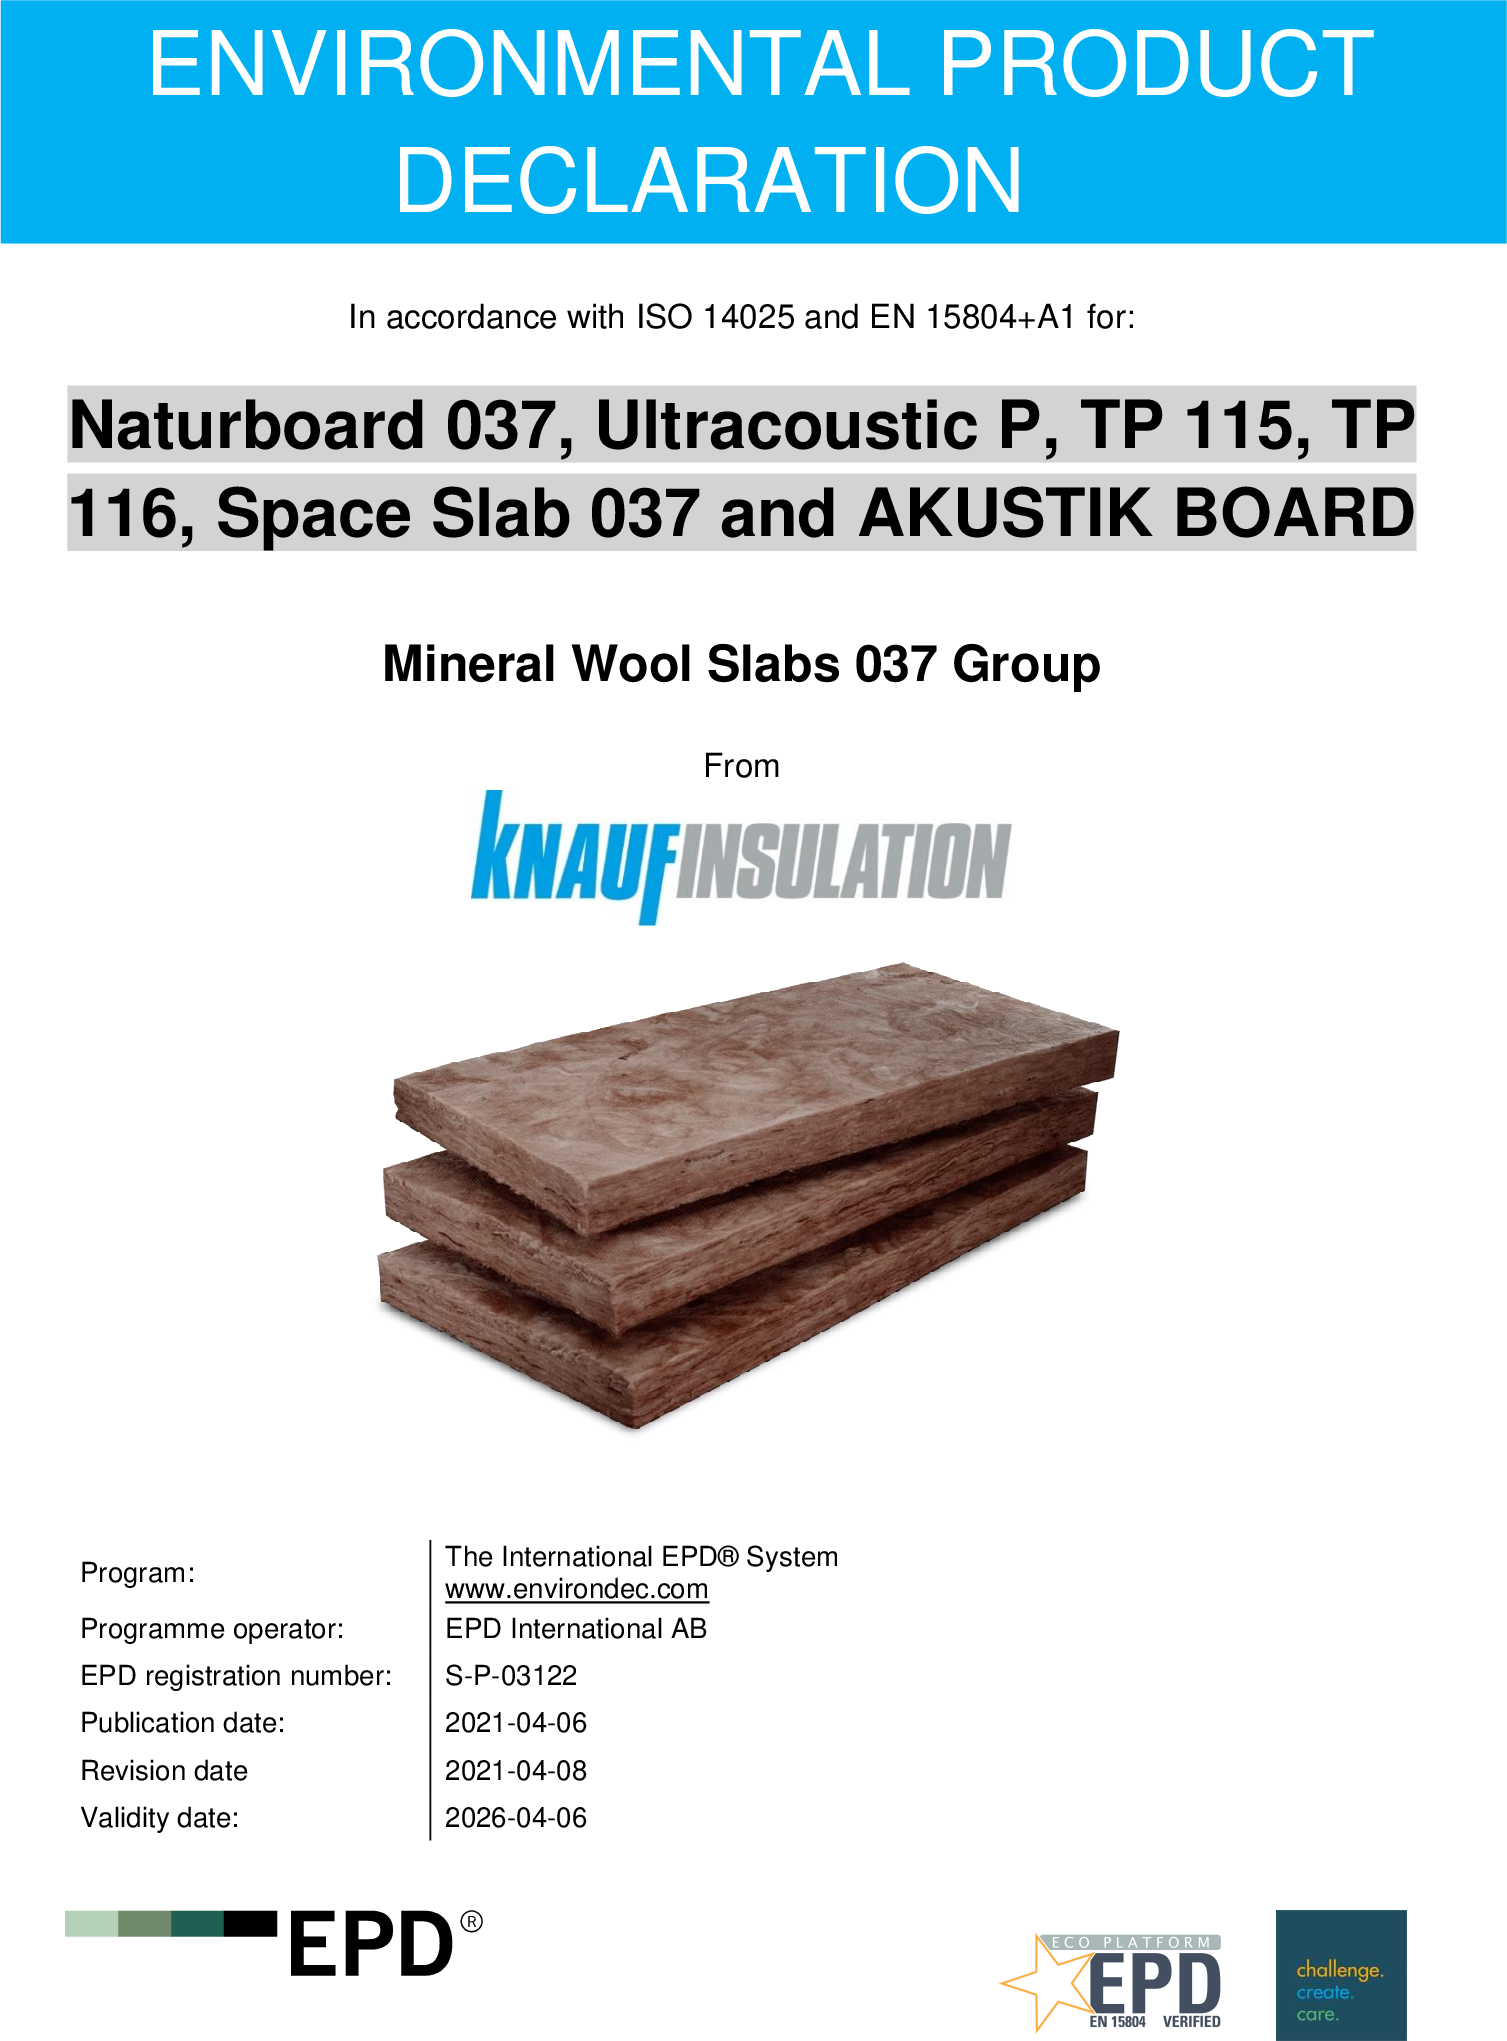 Naturboard 037, Ultracoustic P, TP 115, TP 116,Space Slab 037